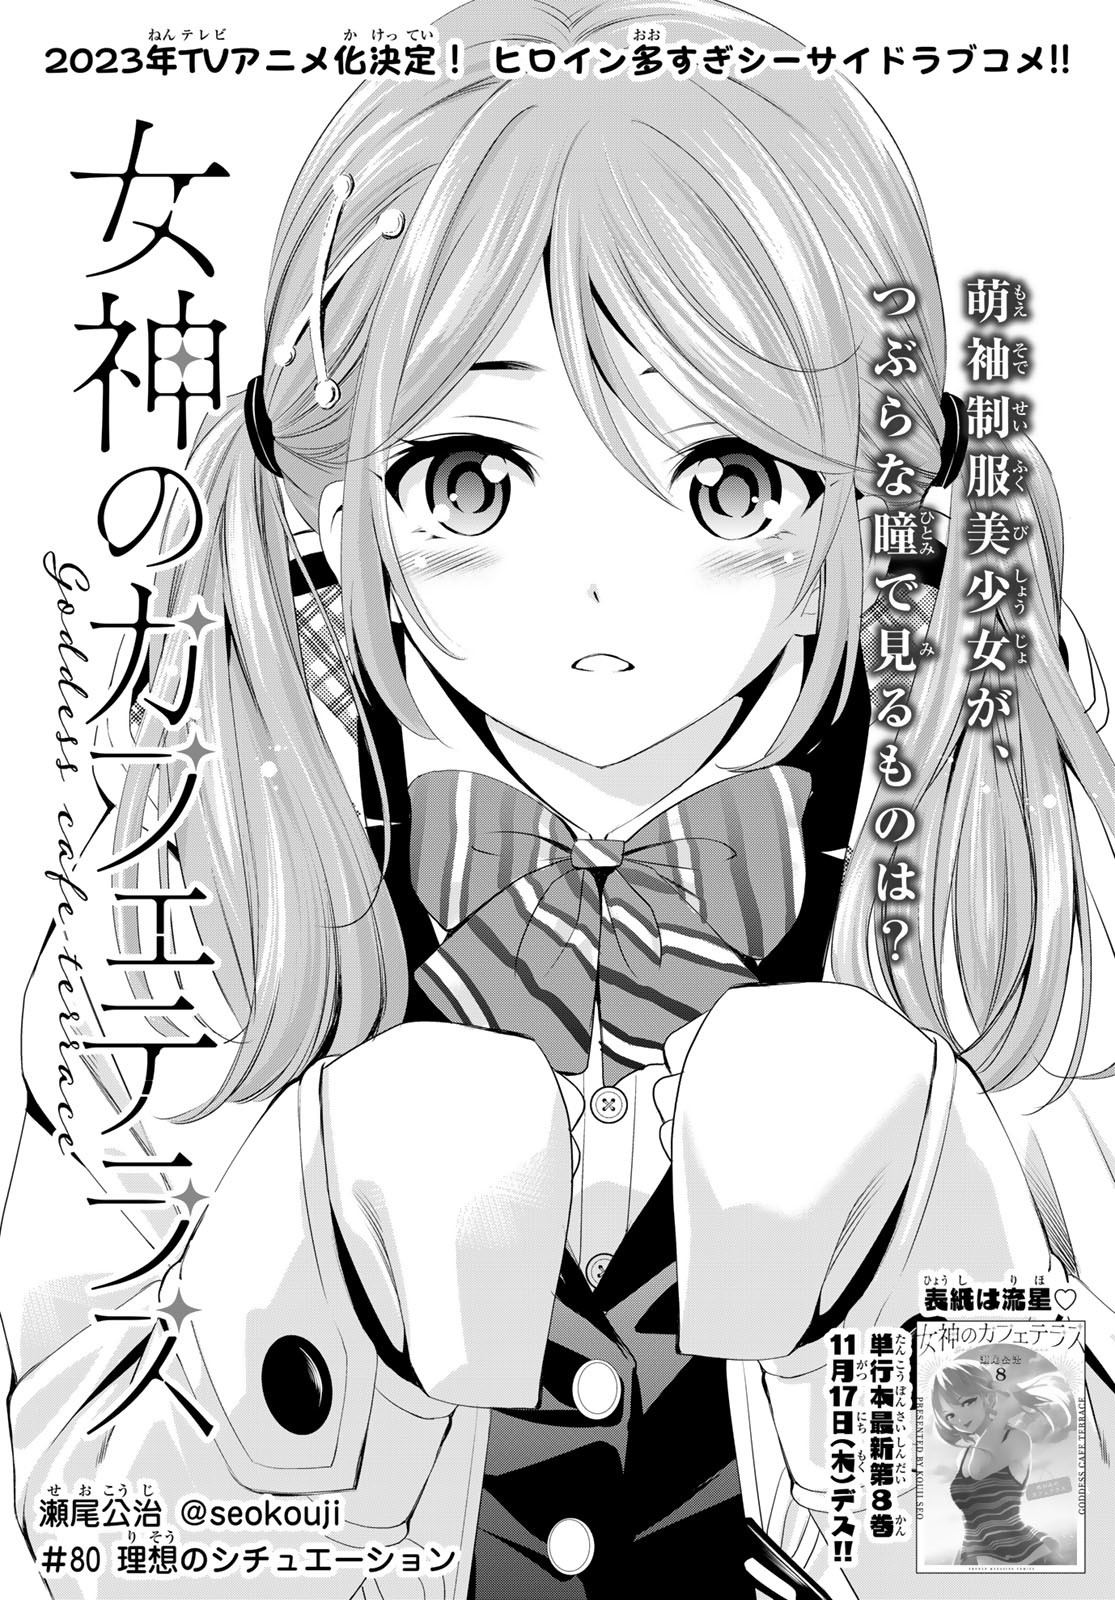 Read Megami no Cafe Terrace Manga Chapter 90 in English Free Online